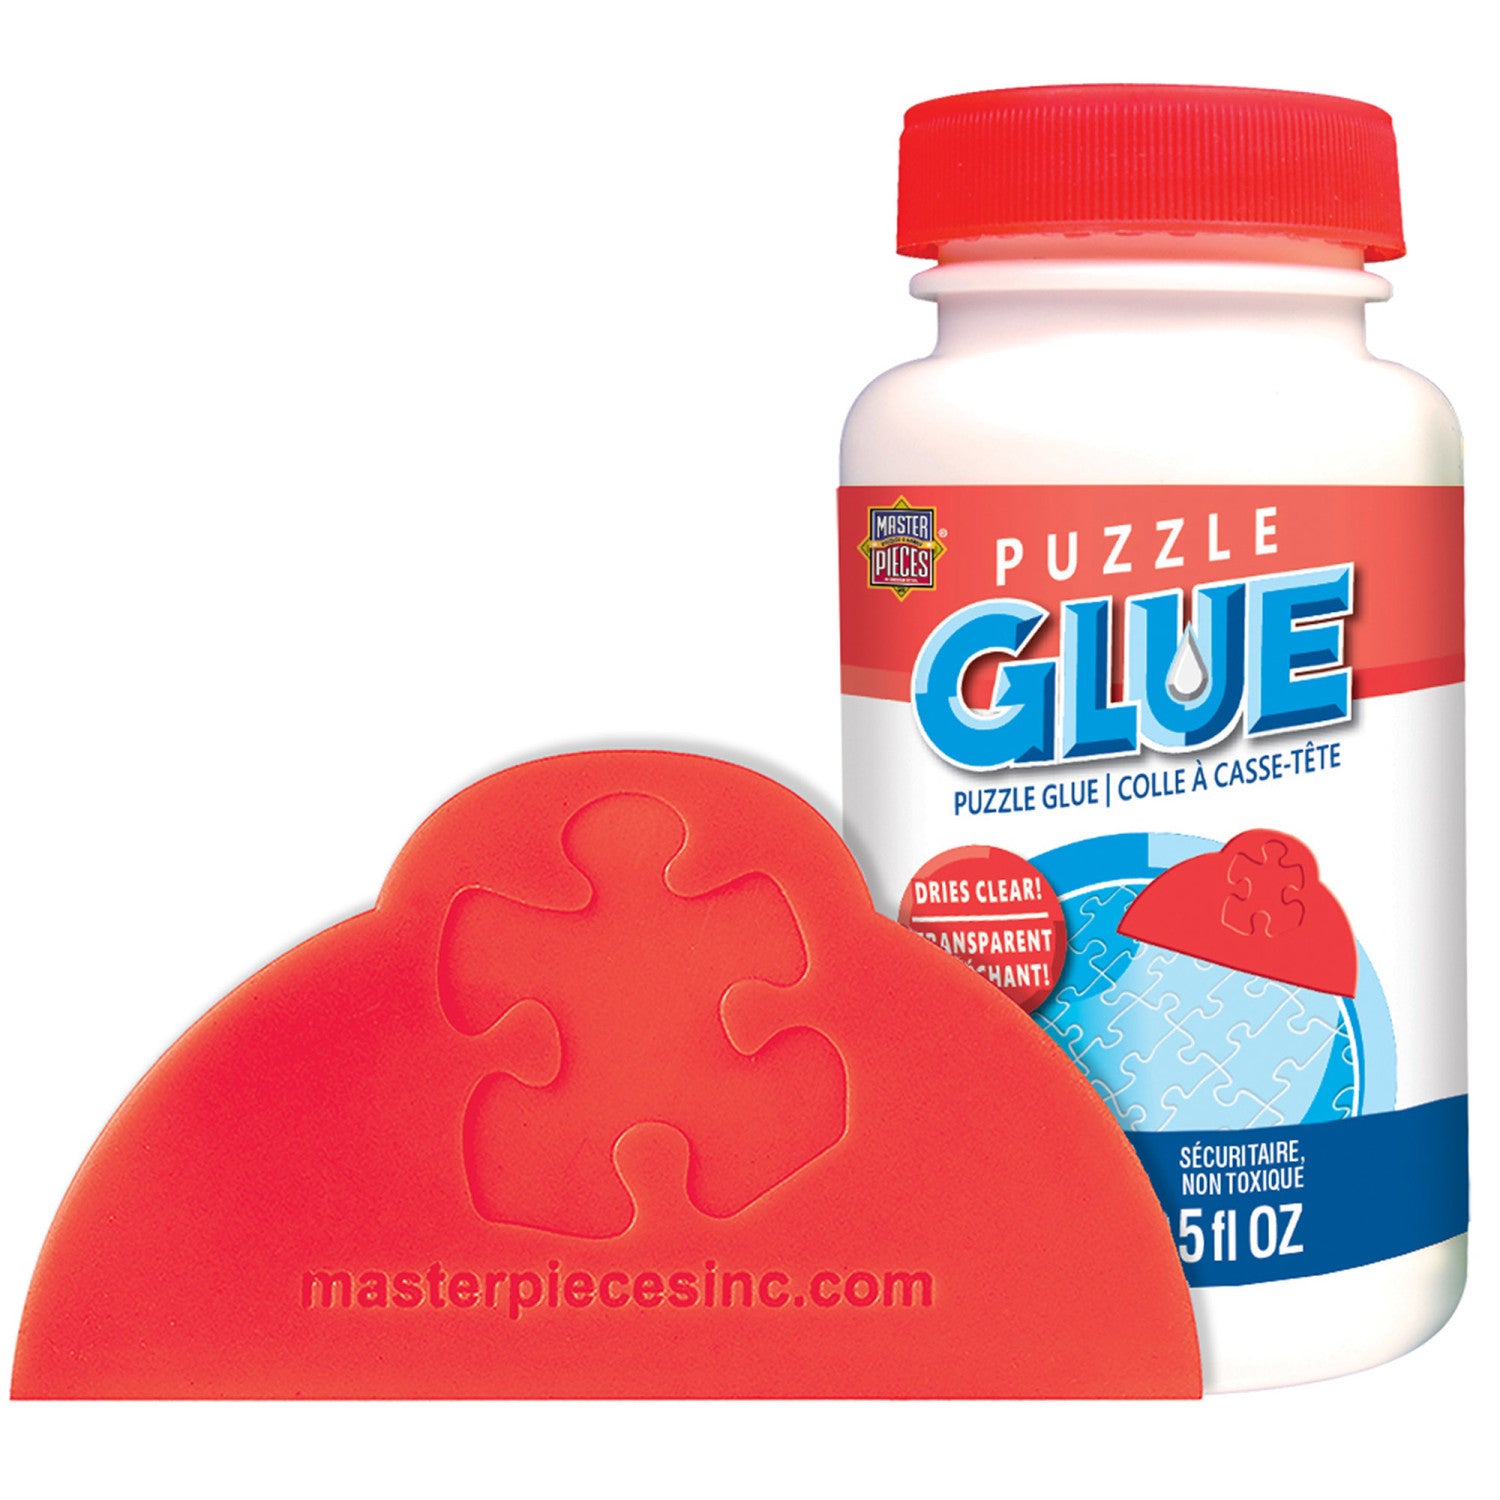 MasterPieces Puzzle Glue Jigsaw Shaped Bottle, Spreader Included, 5 fl oz